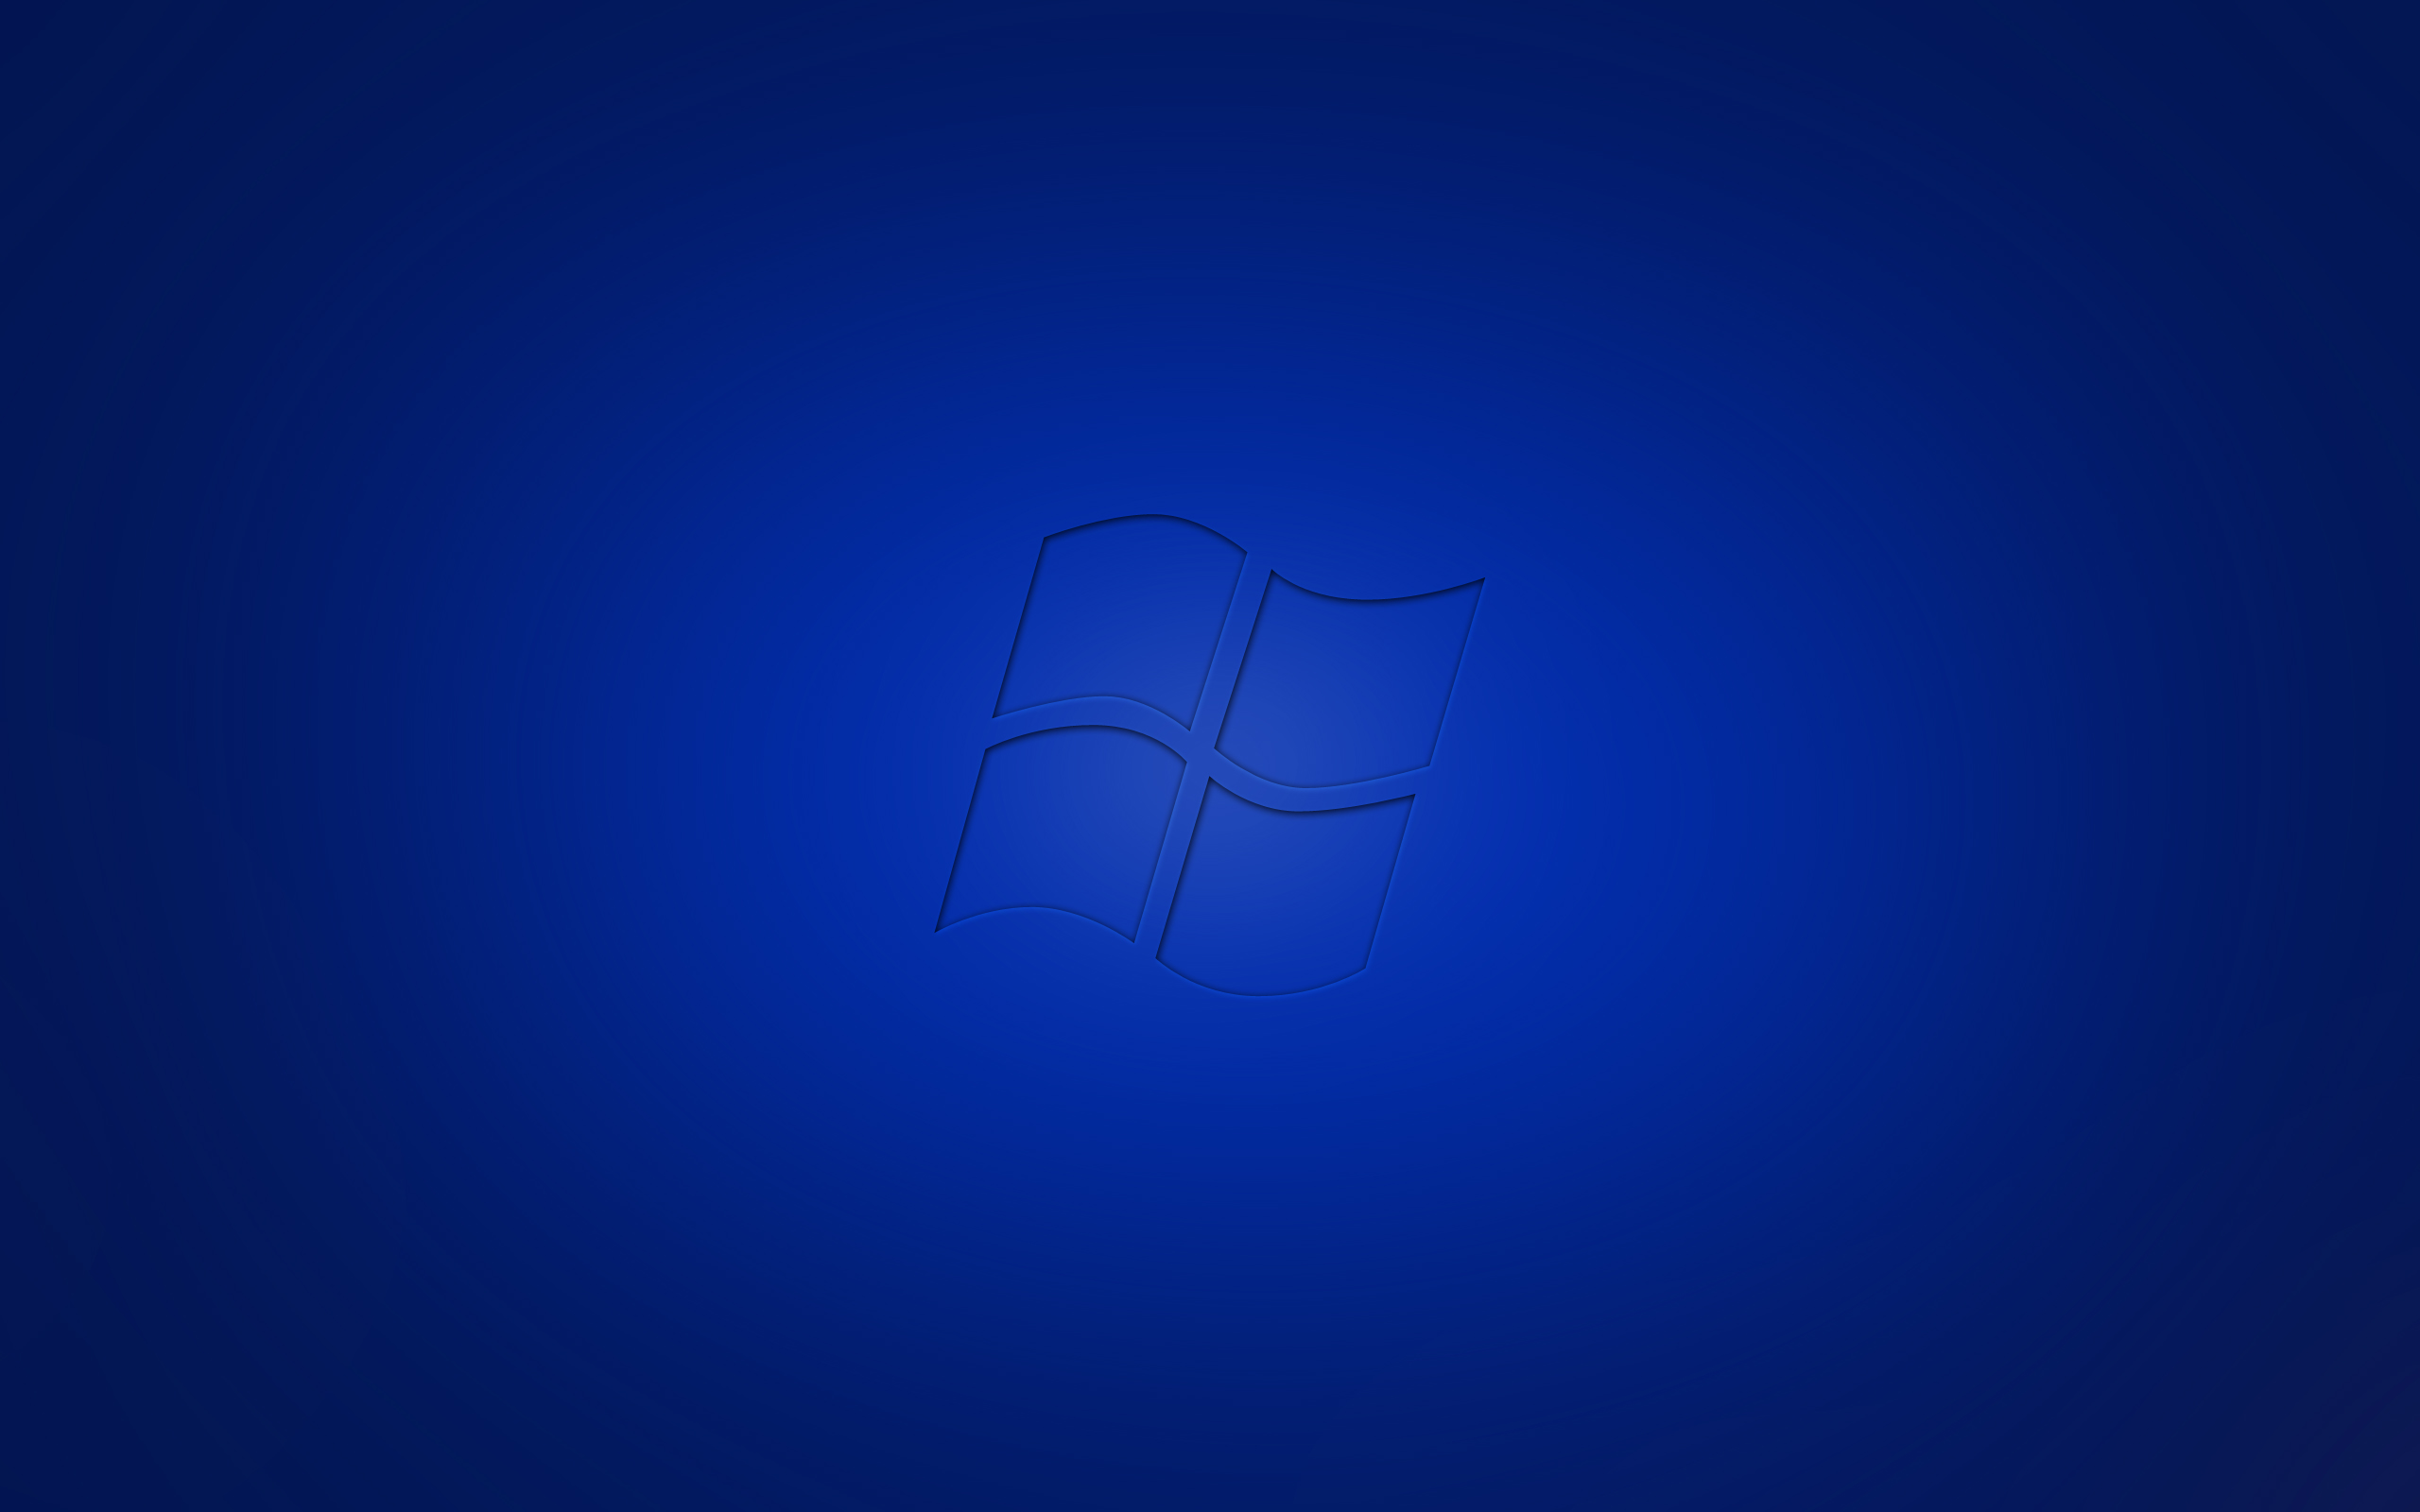 Windows Press Blue | Awesome Wallpapers